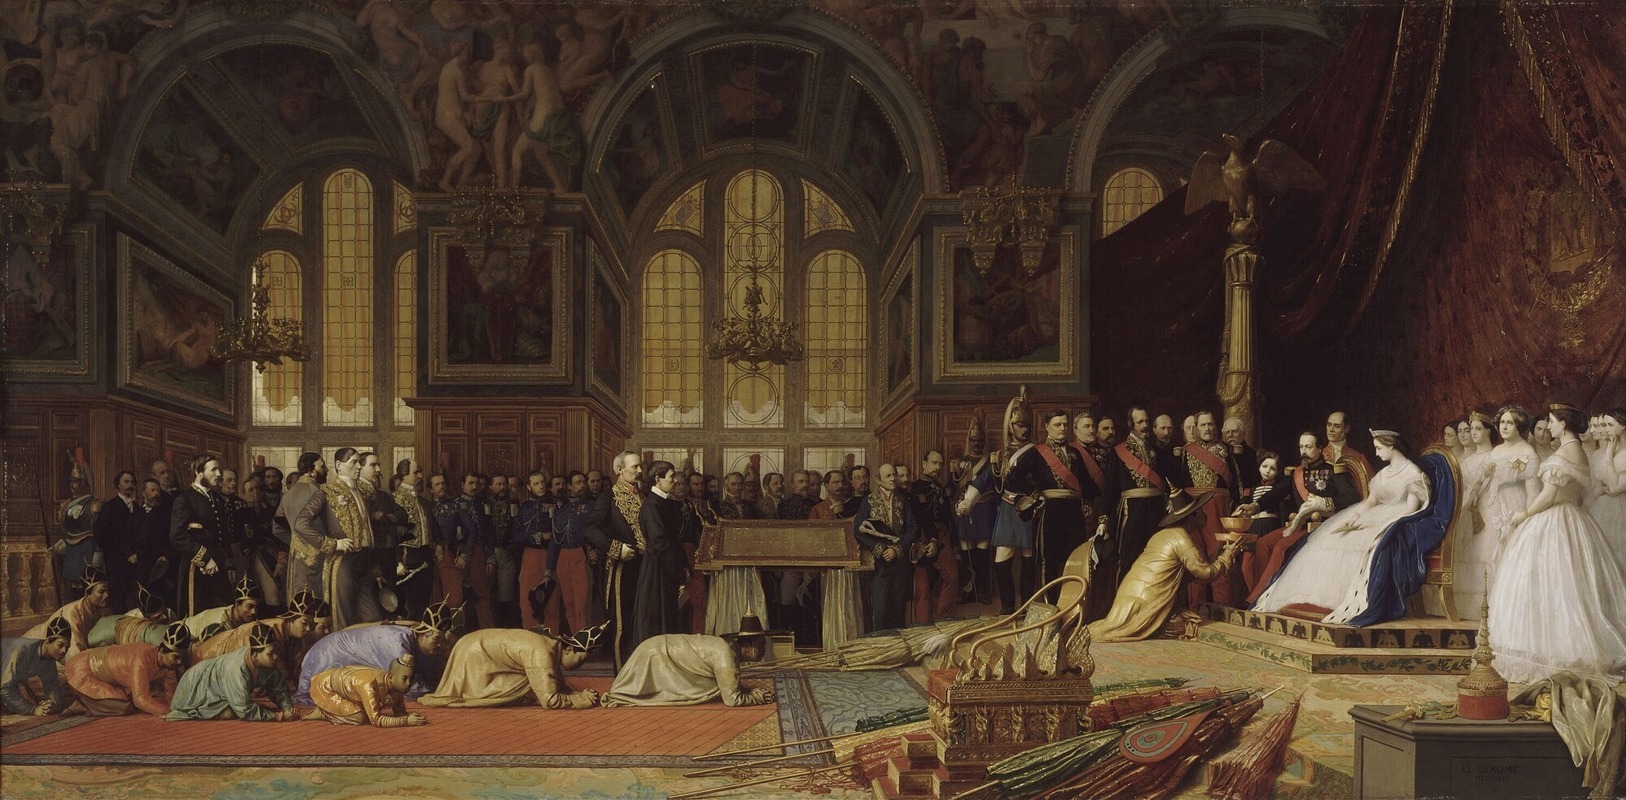 Jean-Léon Gérôme - Reception of the Siamese ambassadors by the Emperor Napoleon III at the Palace of Fontainebleau, June 27, 1861